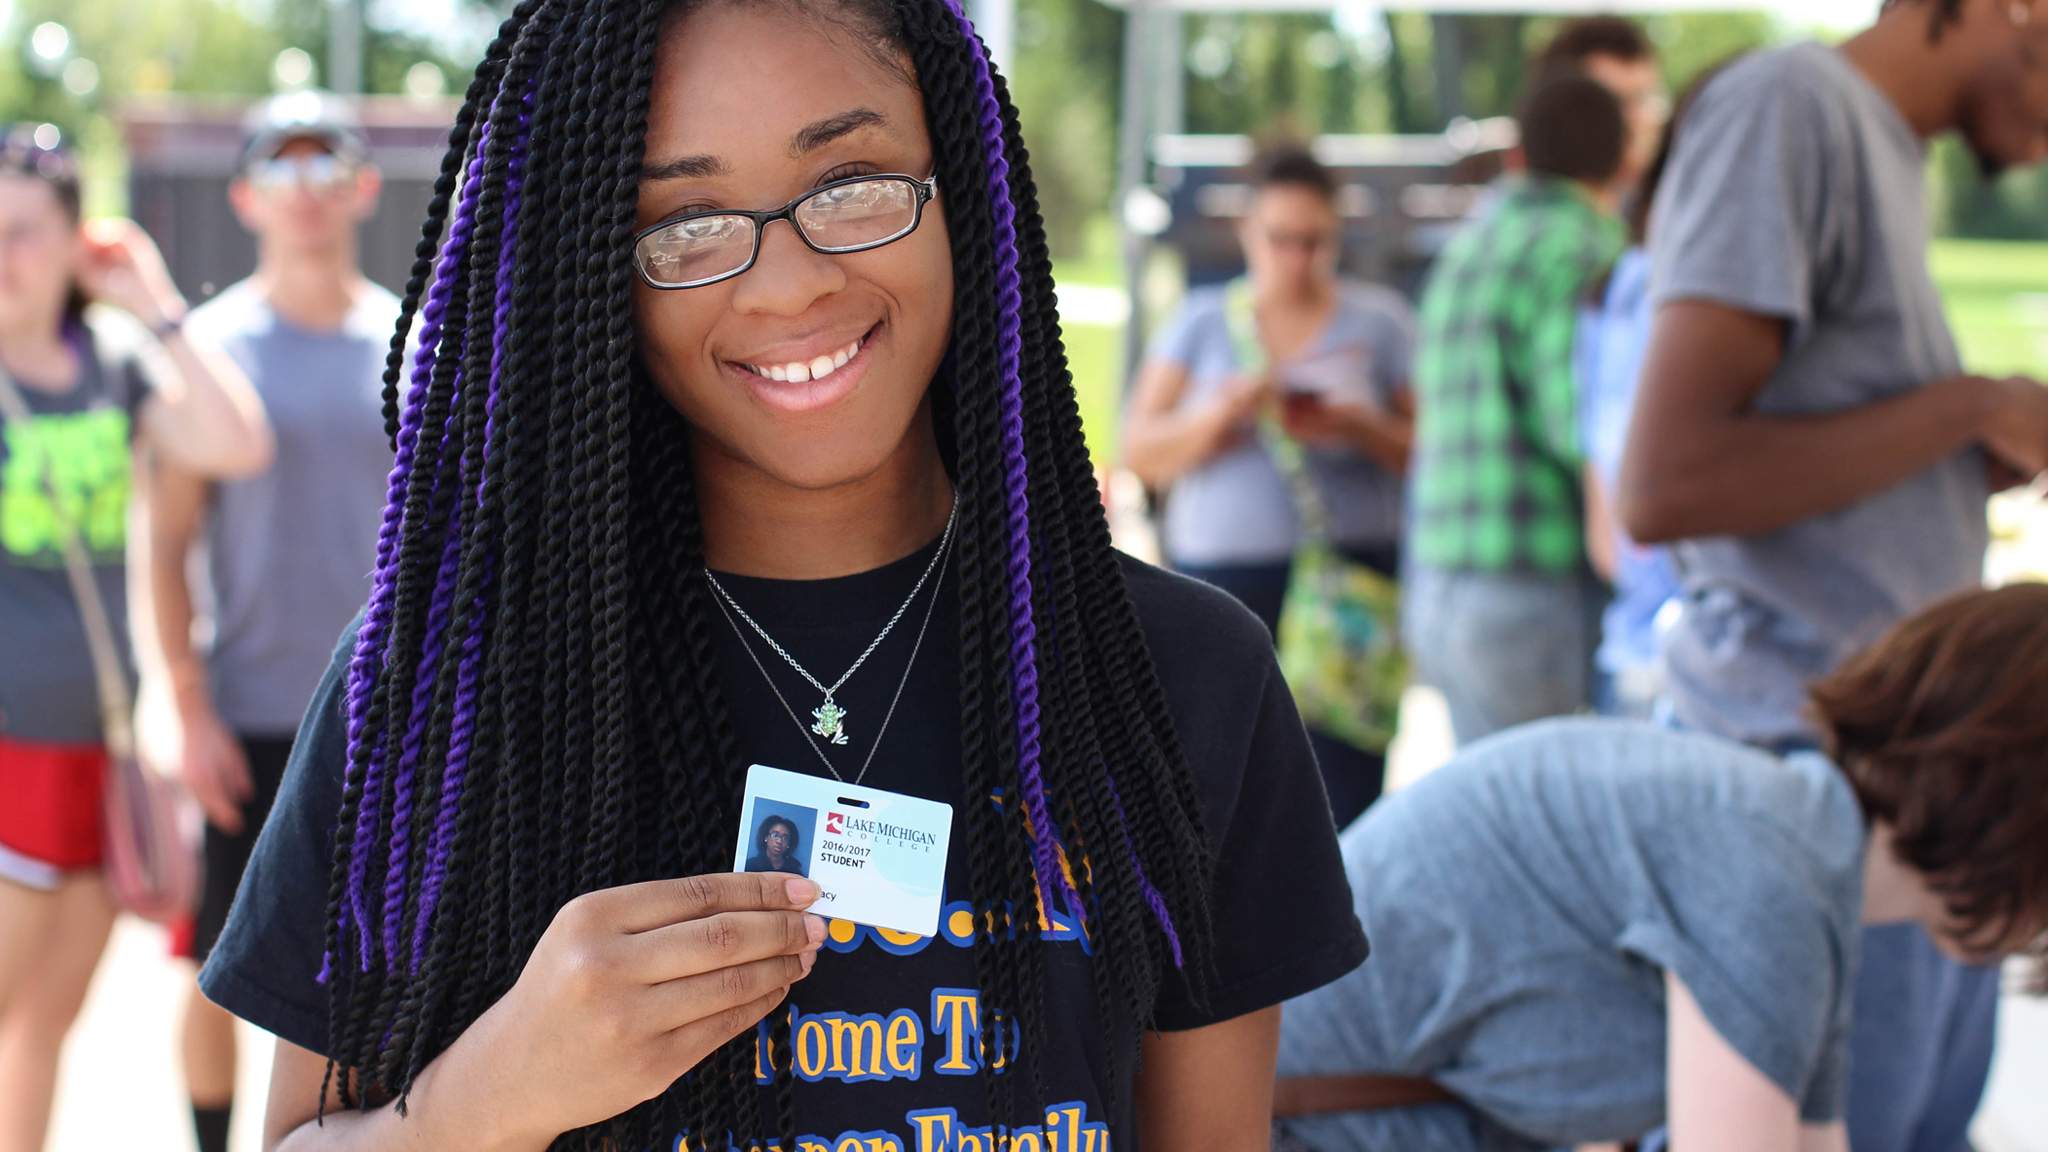 Student with student ID badge